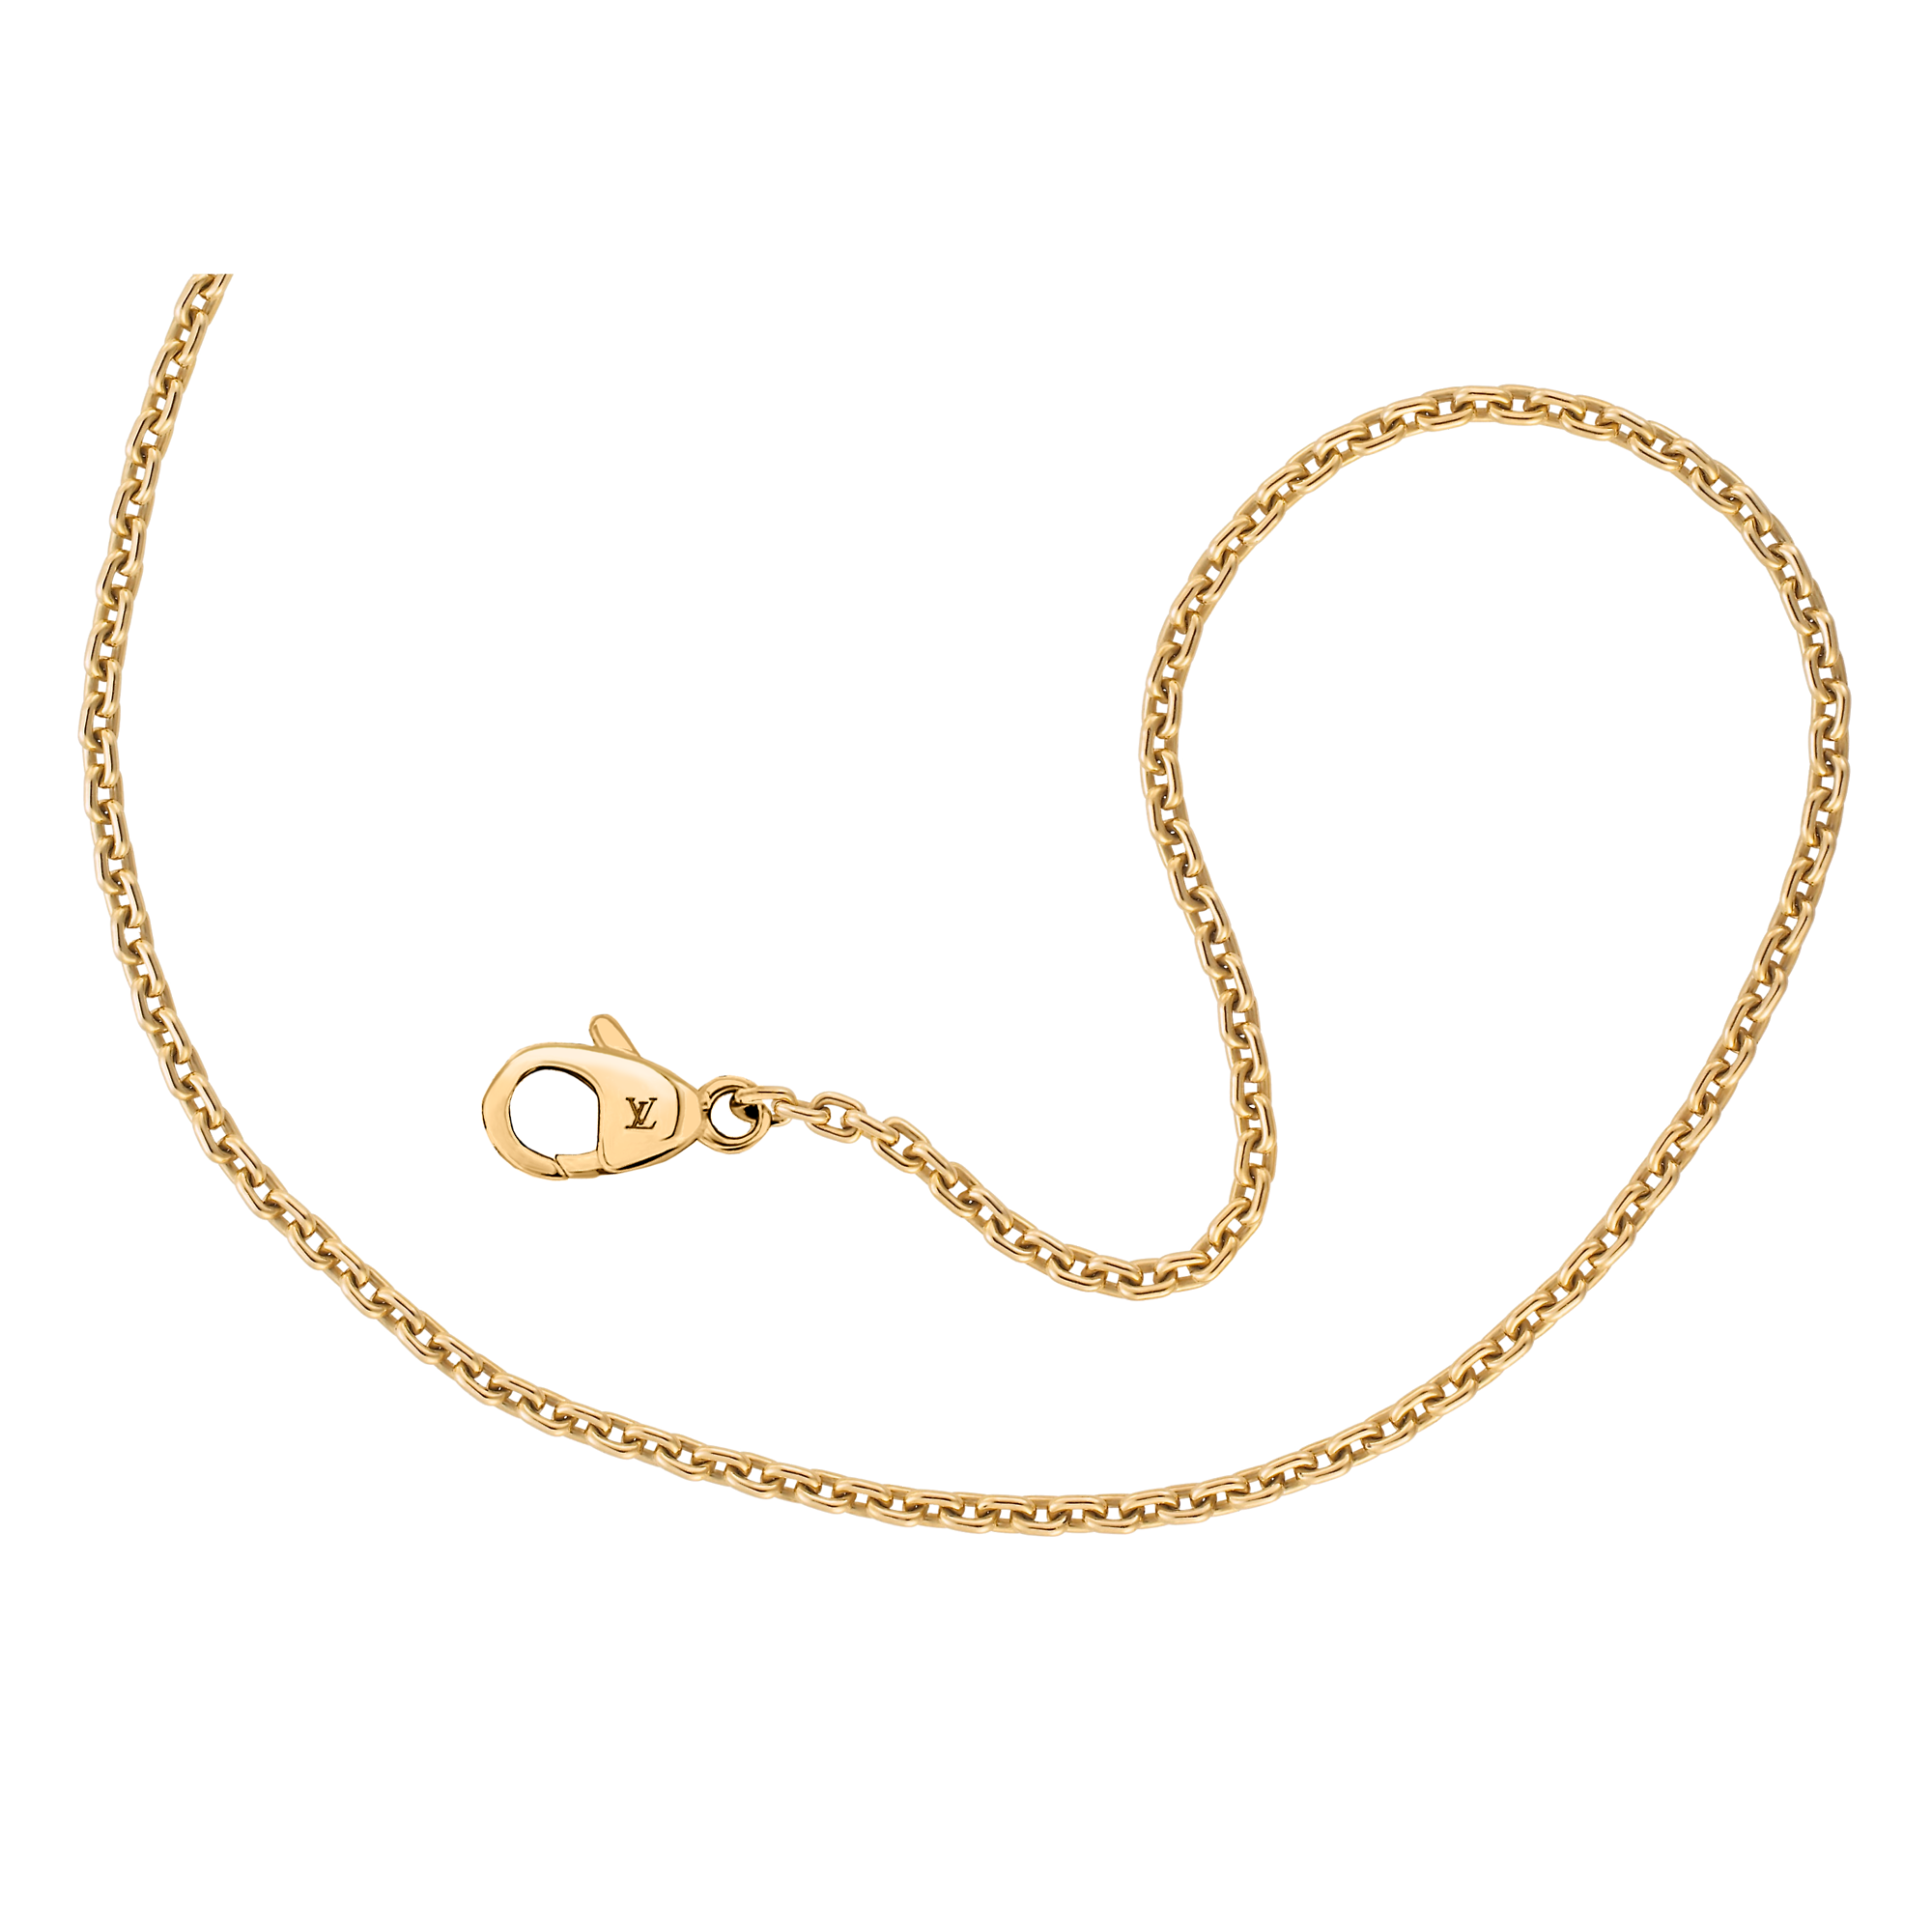 Louis Vuitton Chain in yellow gold – Jewelry – Categories Q92014